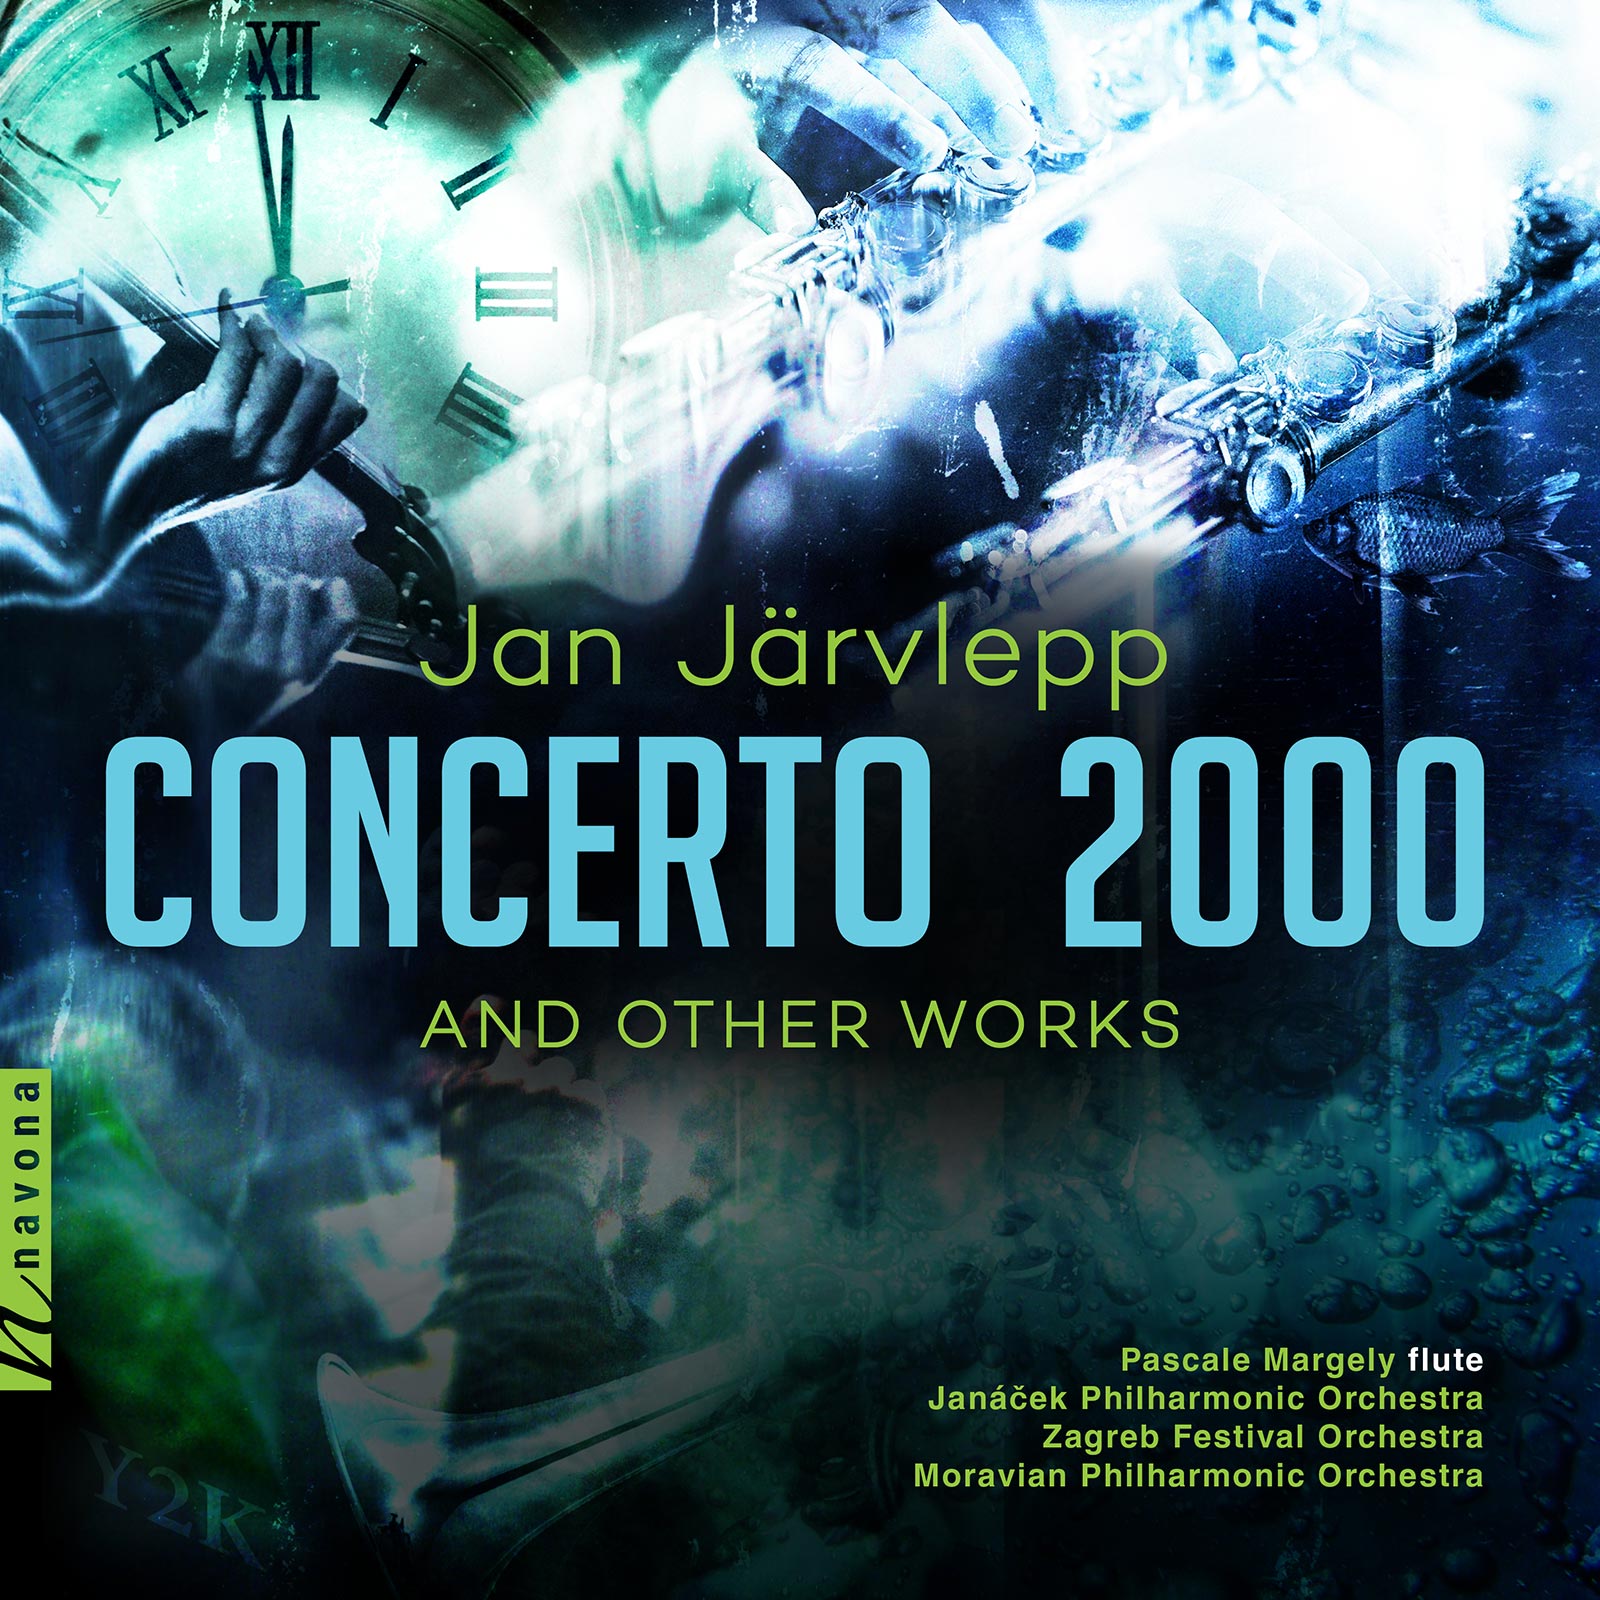 Concerto 2000 and Other Works